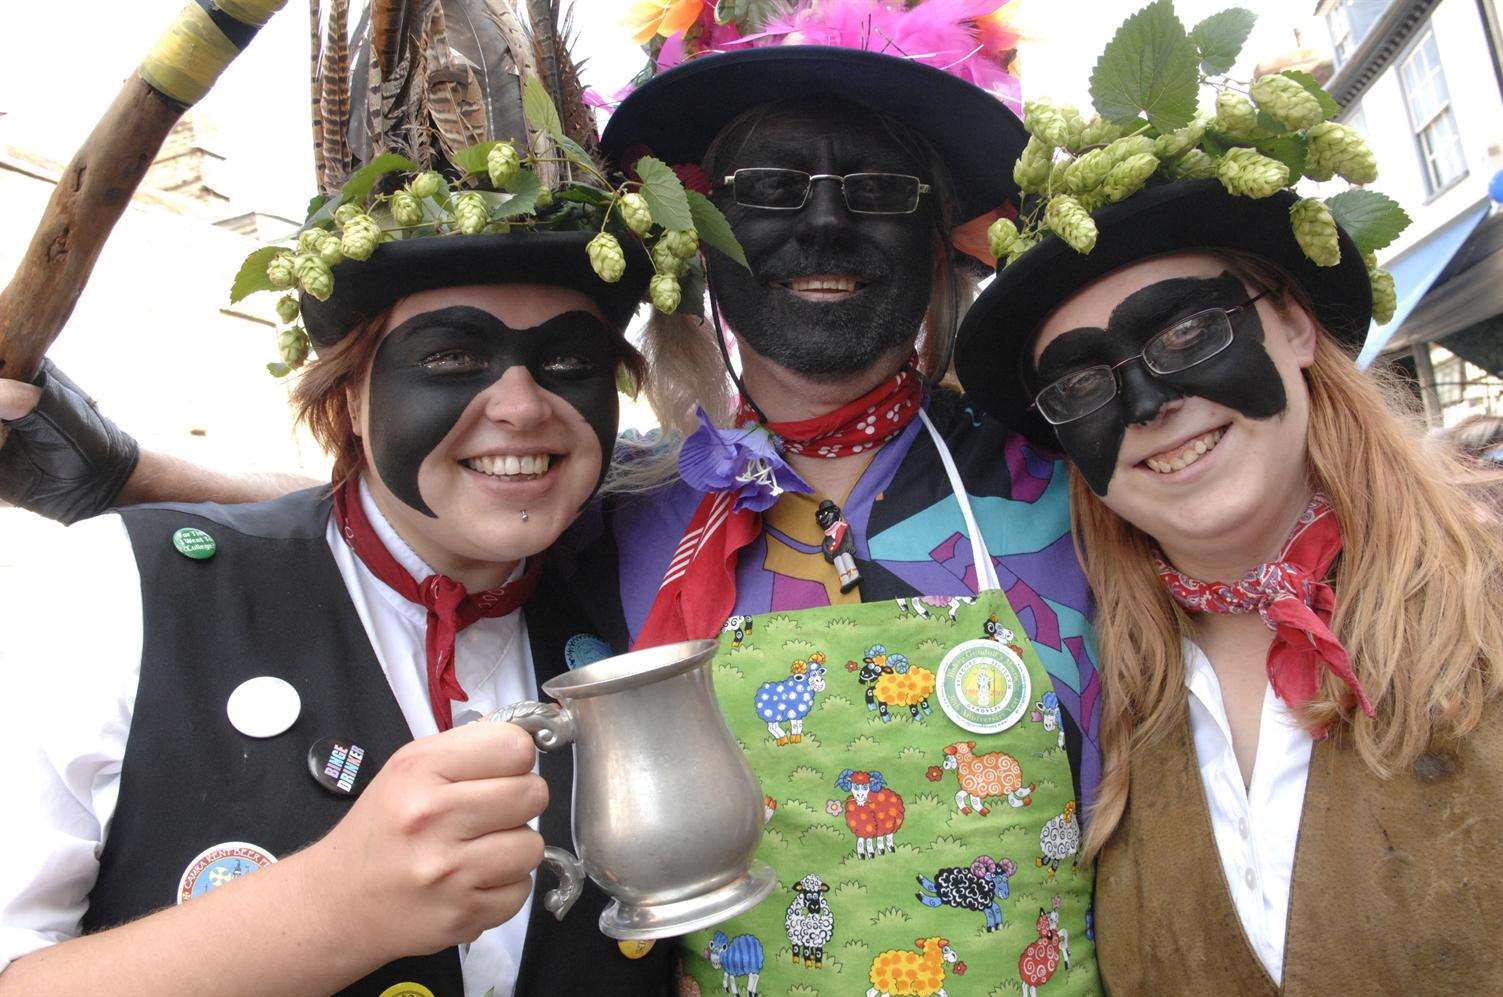 Emma Standen, Steve Hoad and Ruth Taylor of Dead Horse Morris take a break from dancing at the Faversham Hop Festival last year. Picture: Chris Davey.